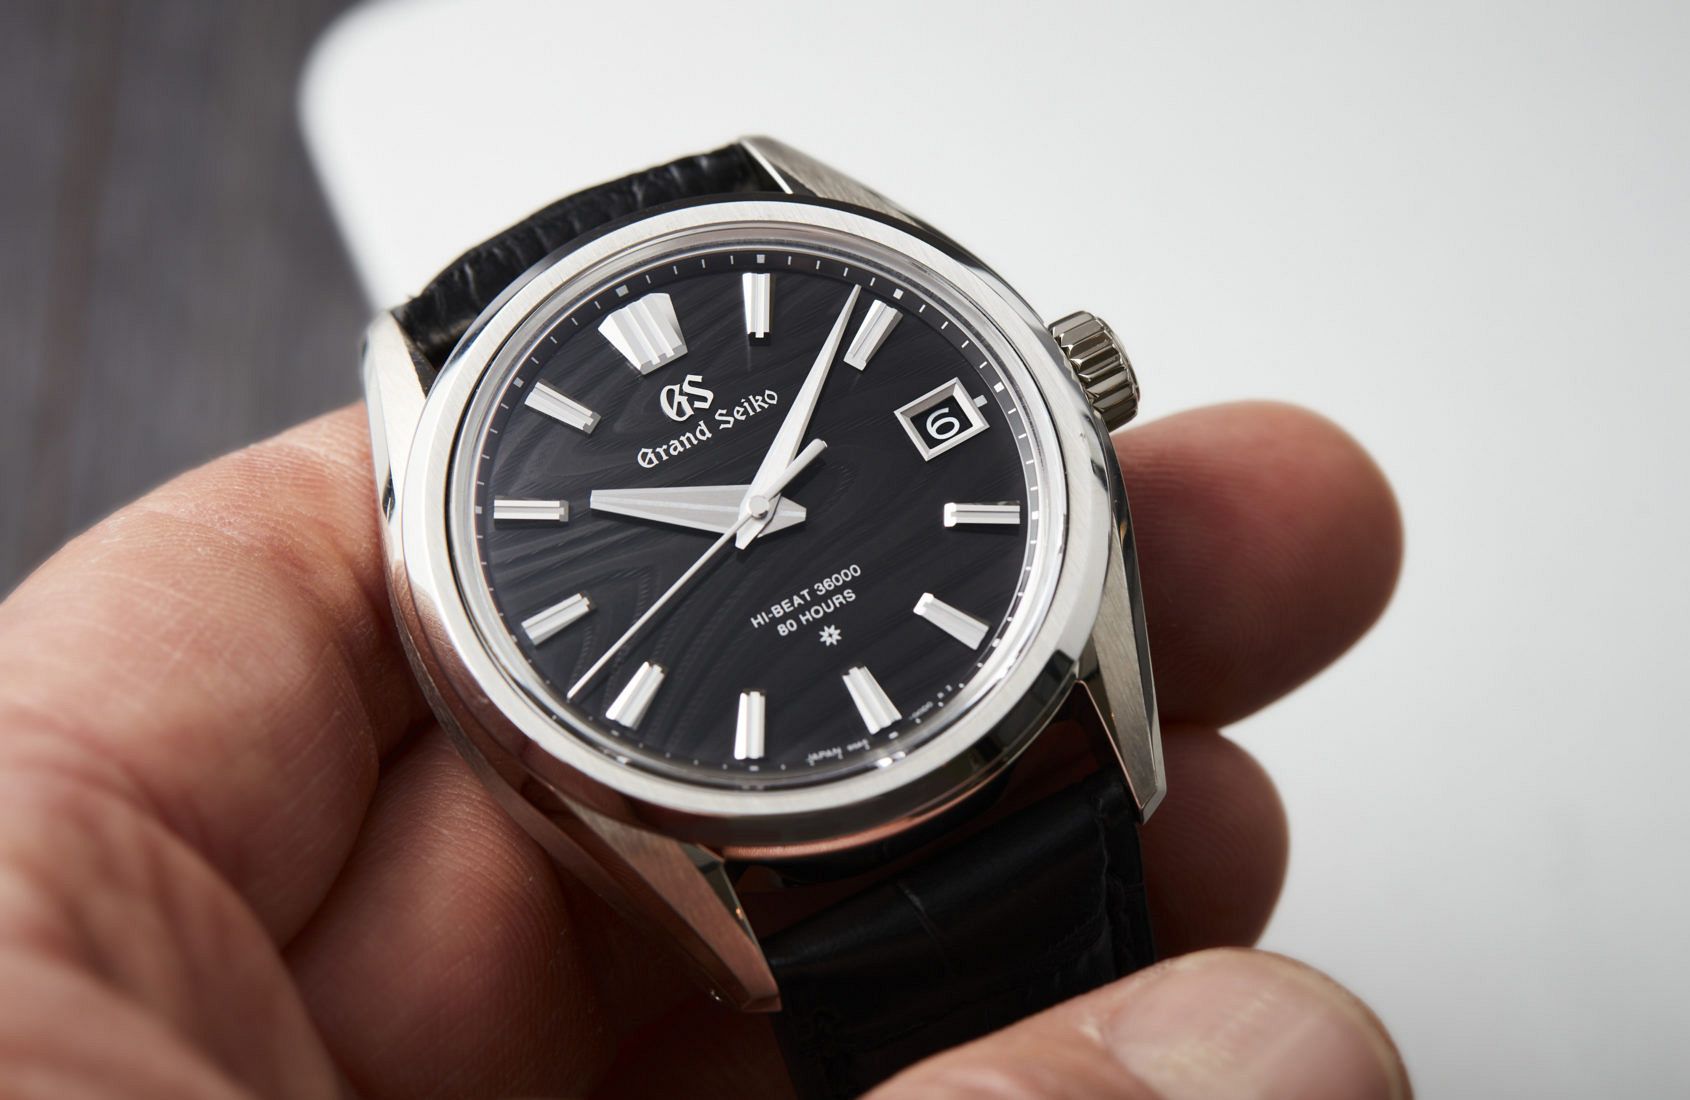 HANDS-ON: The Grand Seiko 140th Anniversary Limited Edition SLGH007